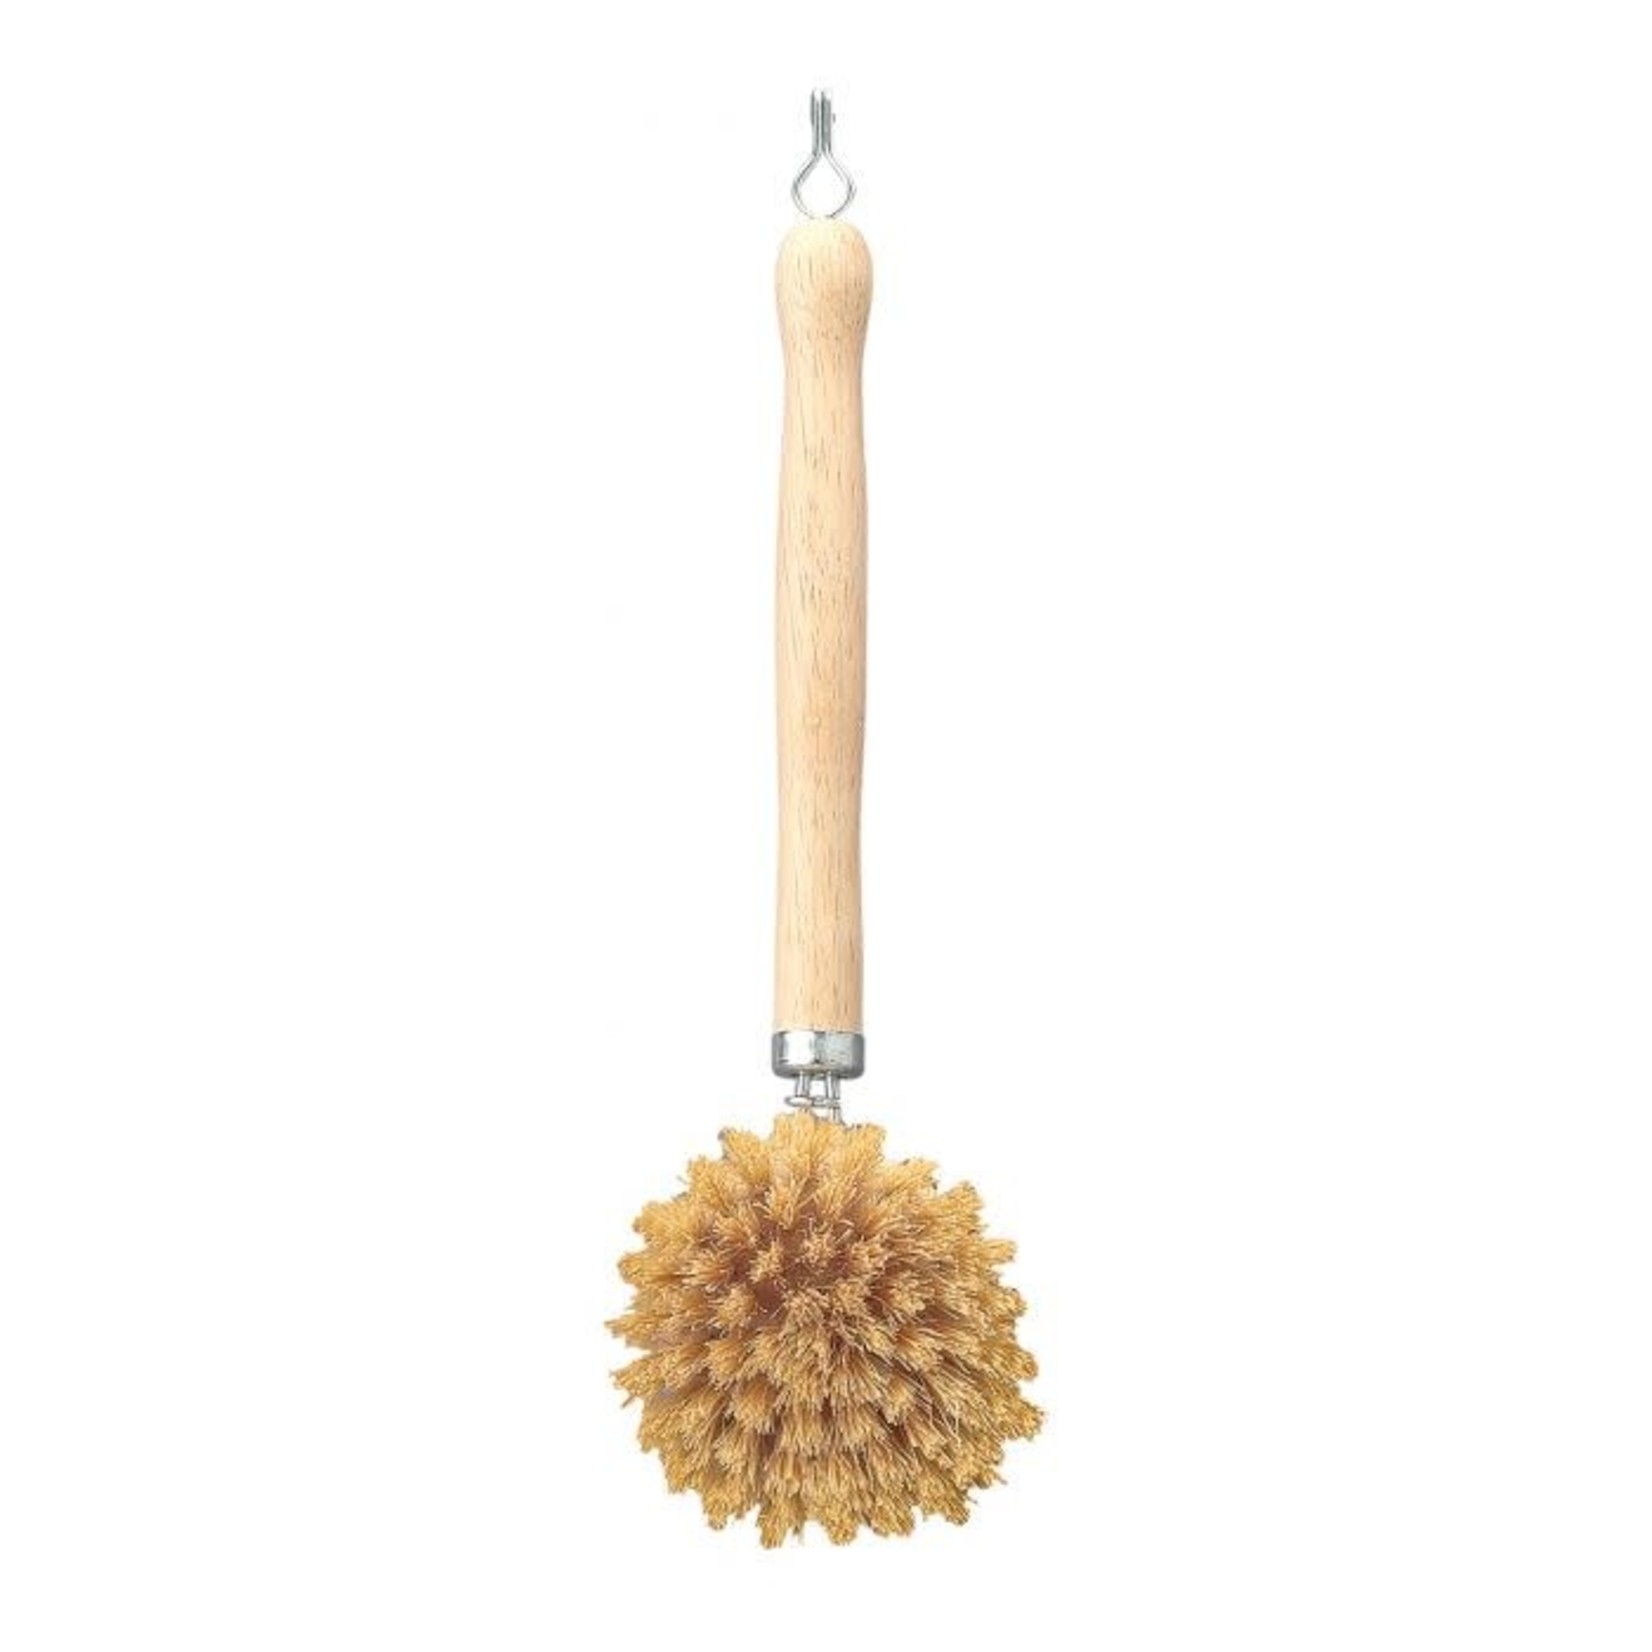 Classic Dish Washing Brush, Stainless Steel Handle, with Natural Bristles